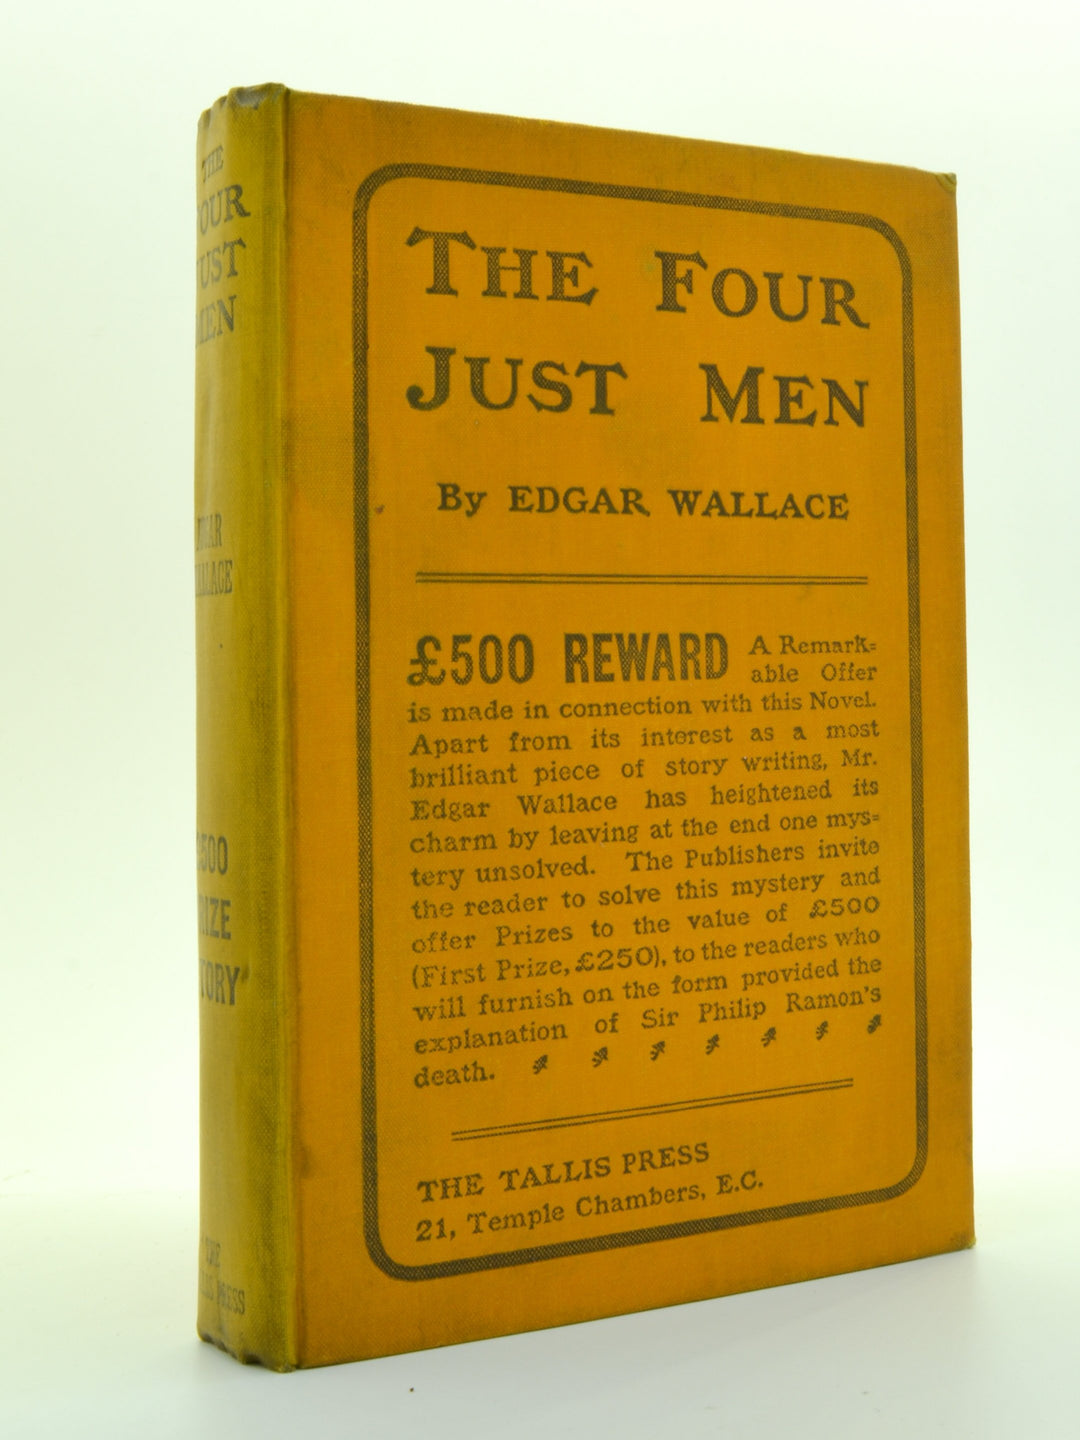 Wallace, Edgar - The Four Just Men | back cover